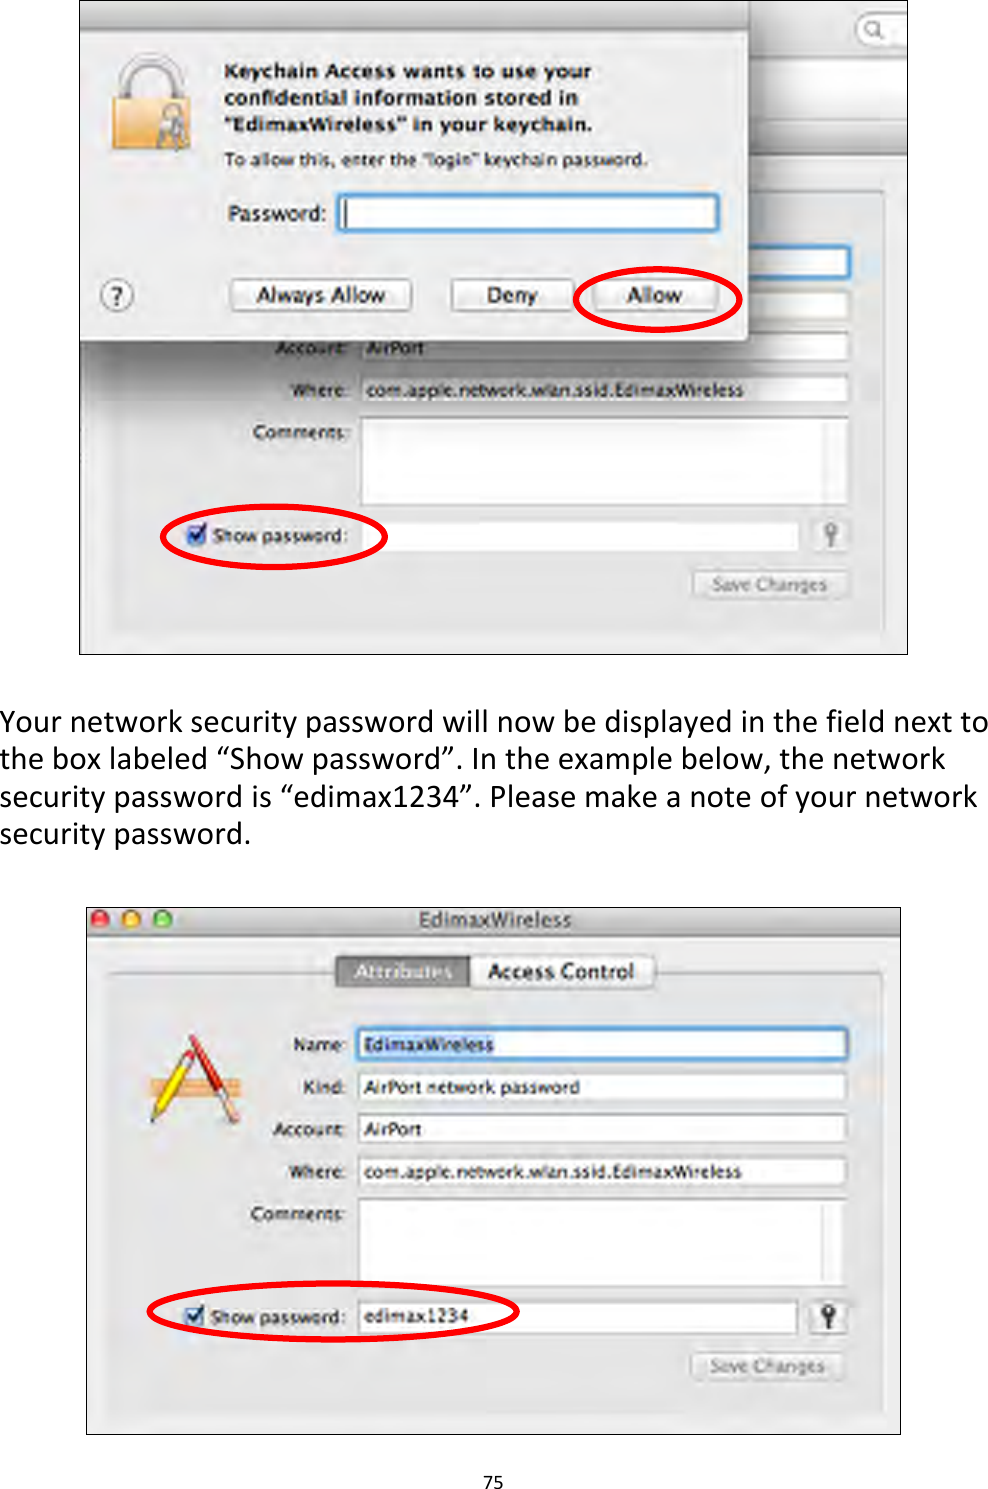 75      Your network security password will now be displayed in the field next to the box labeled “Show password”. In the example below, the network security password is “edimax1234”. Please make a note of your network security password.   